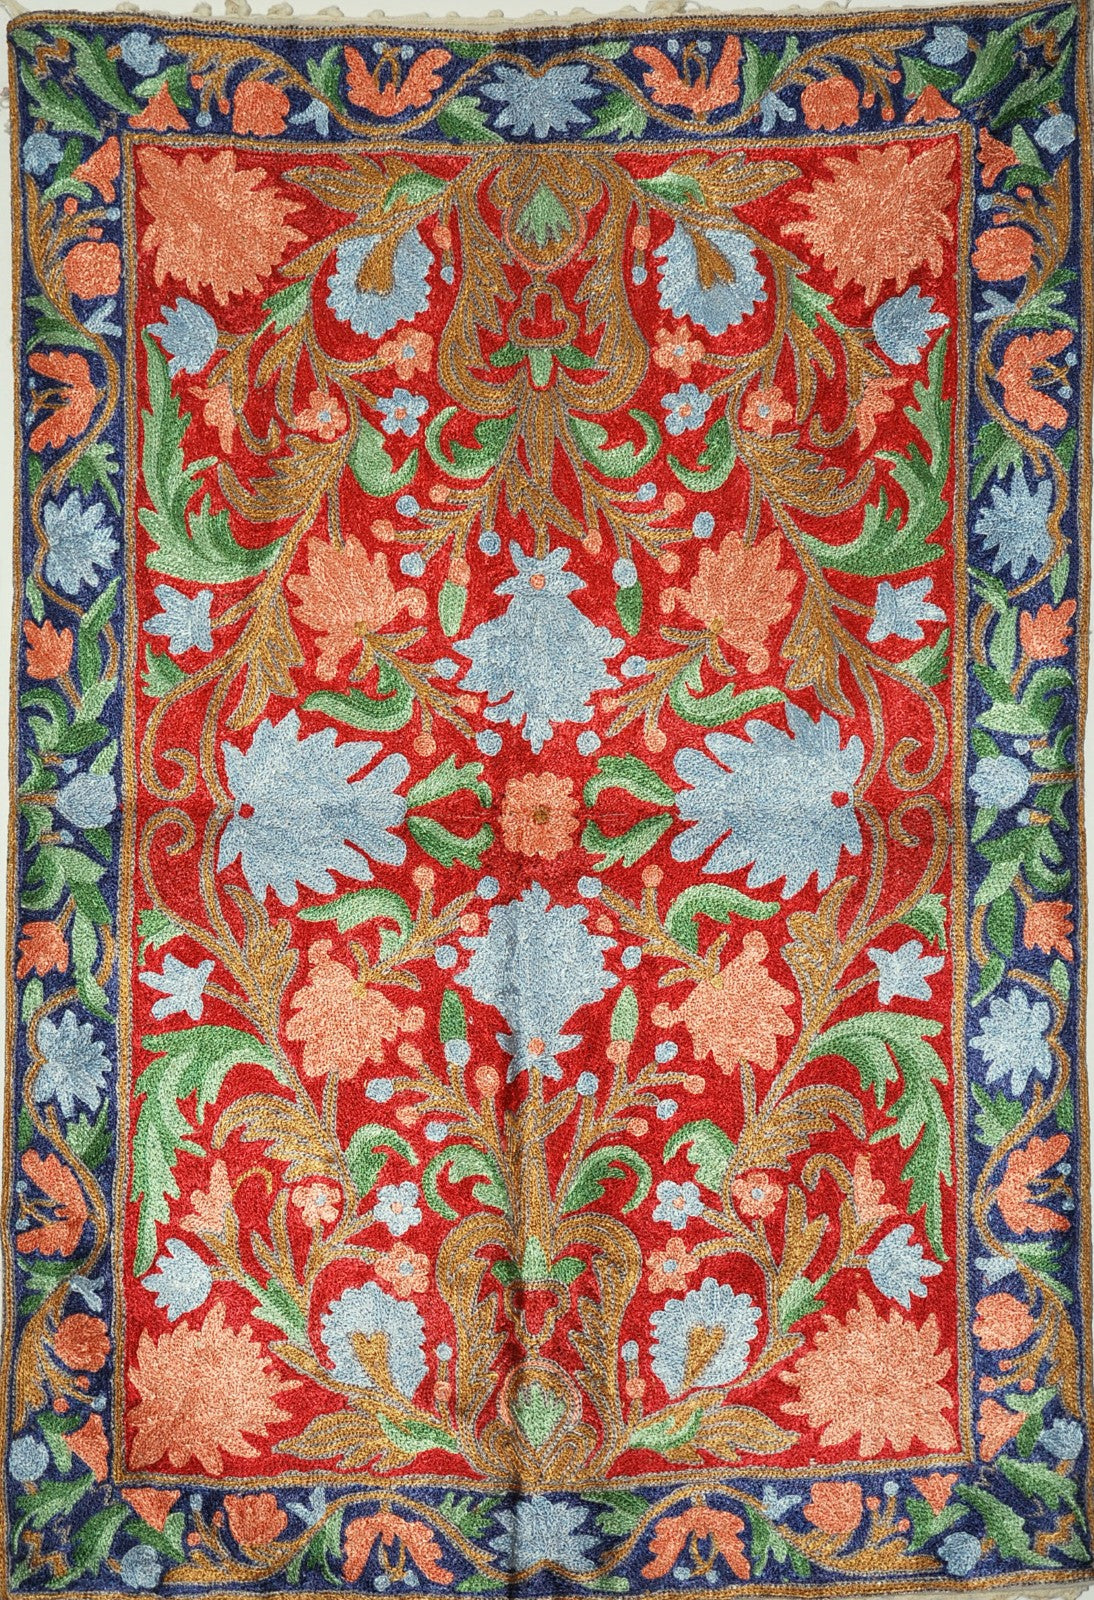 ChainStitch Tapestry Silk Wall Hanging Area Rug, Multicolor Embroidery 2x3 feet #CWR6201